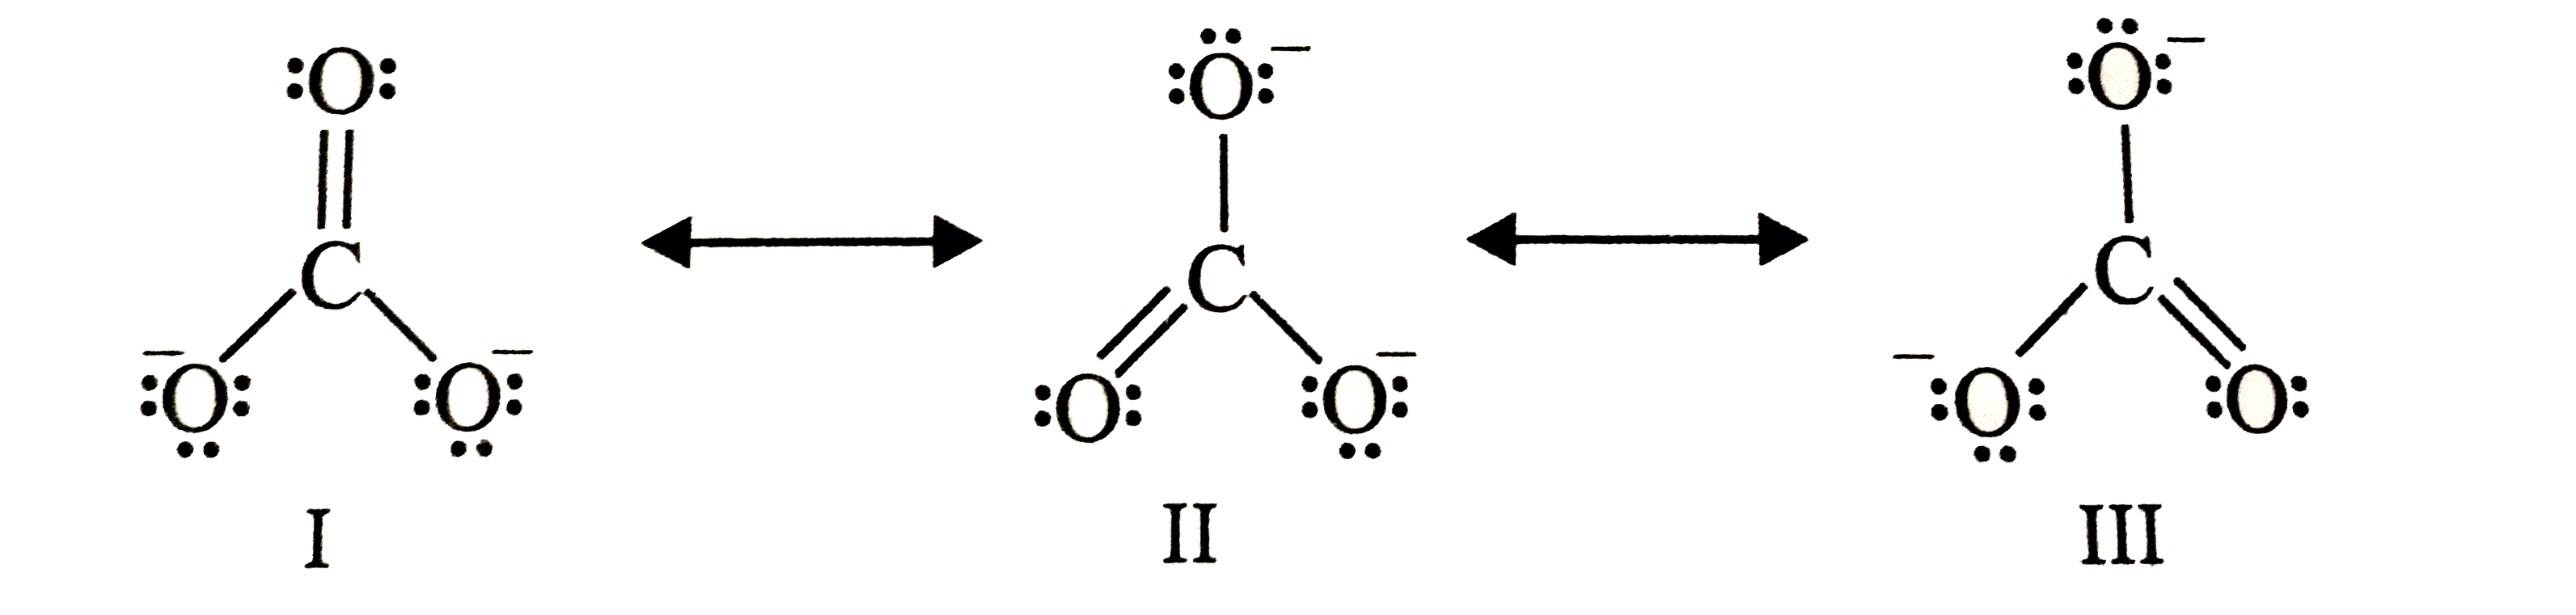 The given structures I, II and III of carbonate ion represent